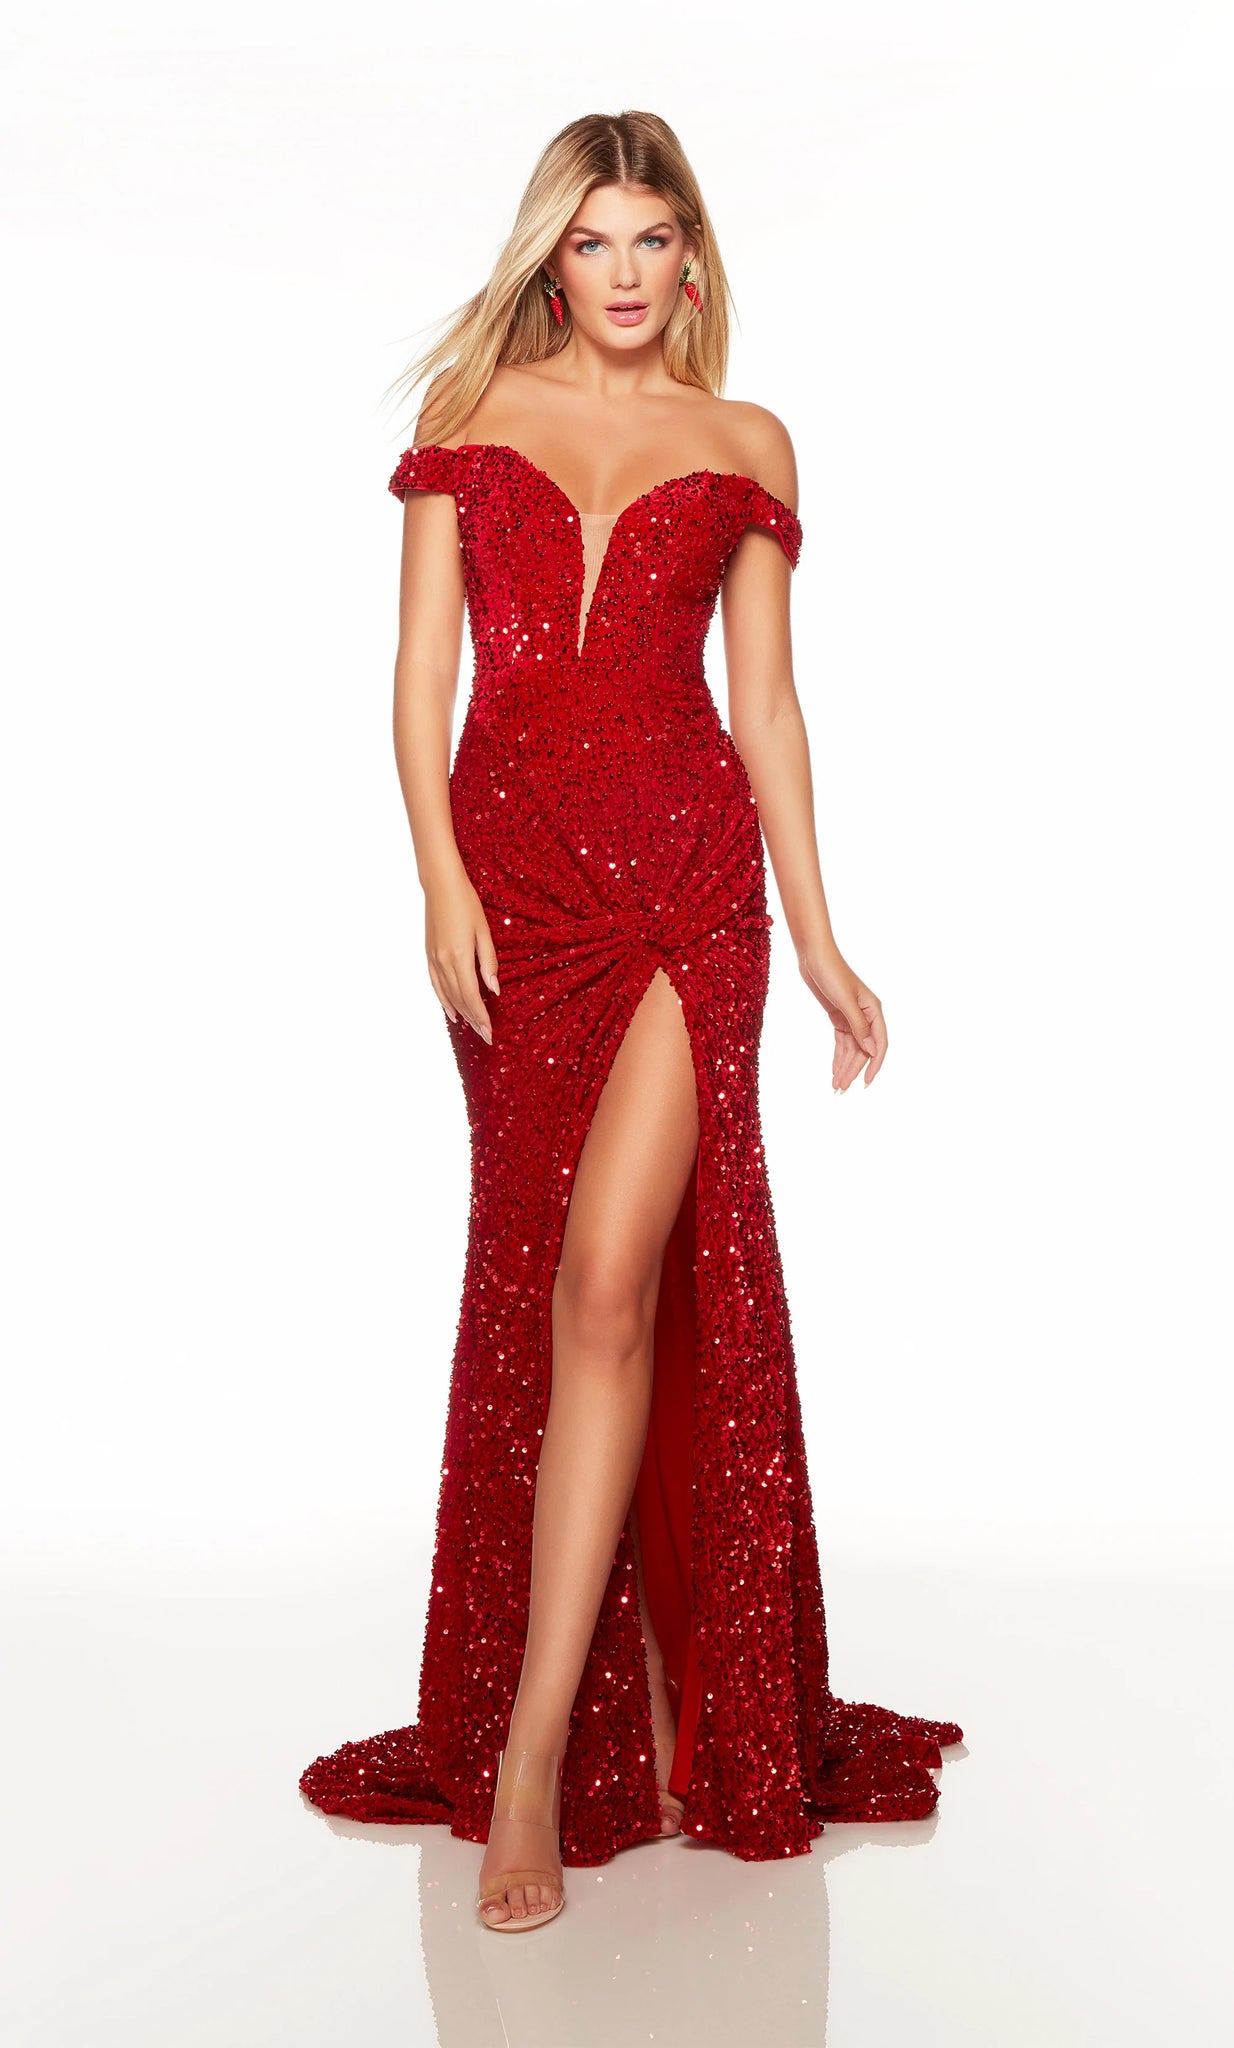 Formal Wear, Long, Plush Sequins, Cowl Neck, Straight, Strappy Back, Knotted Detail, Side Slit, Train